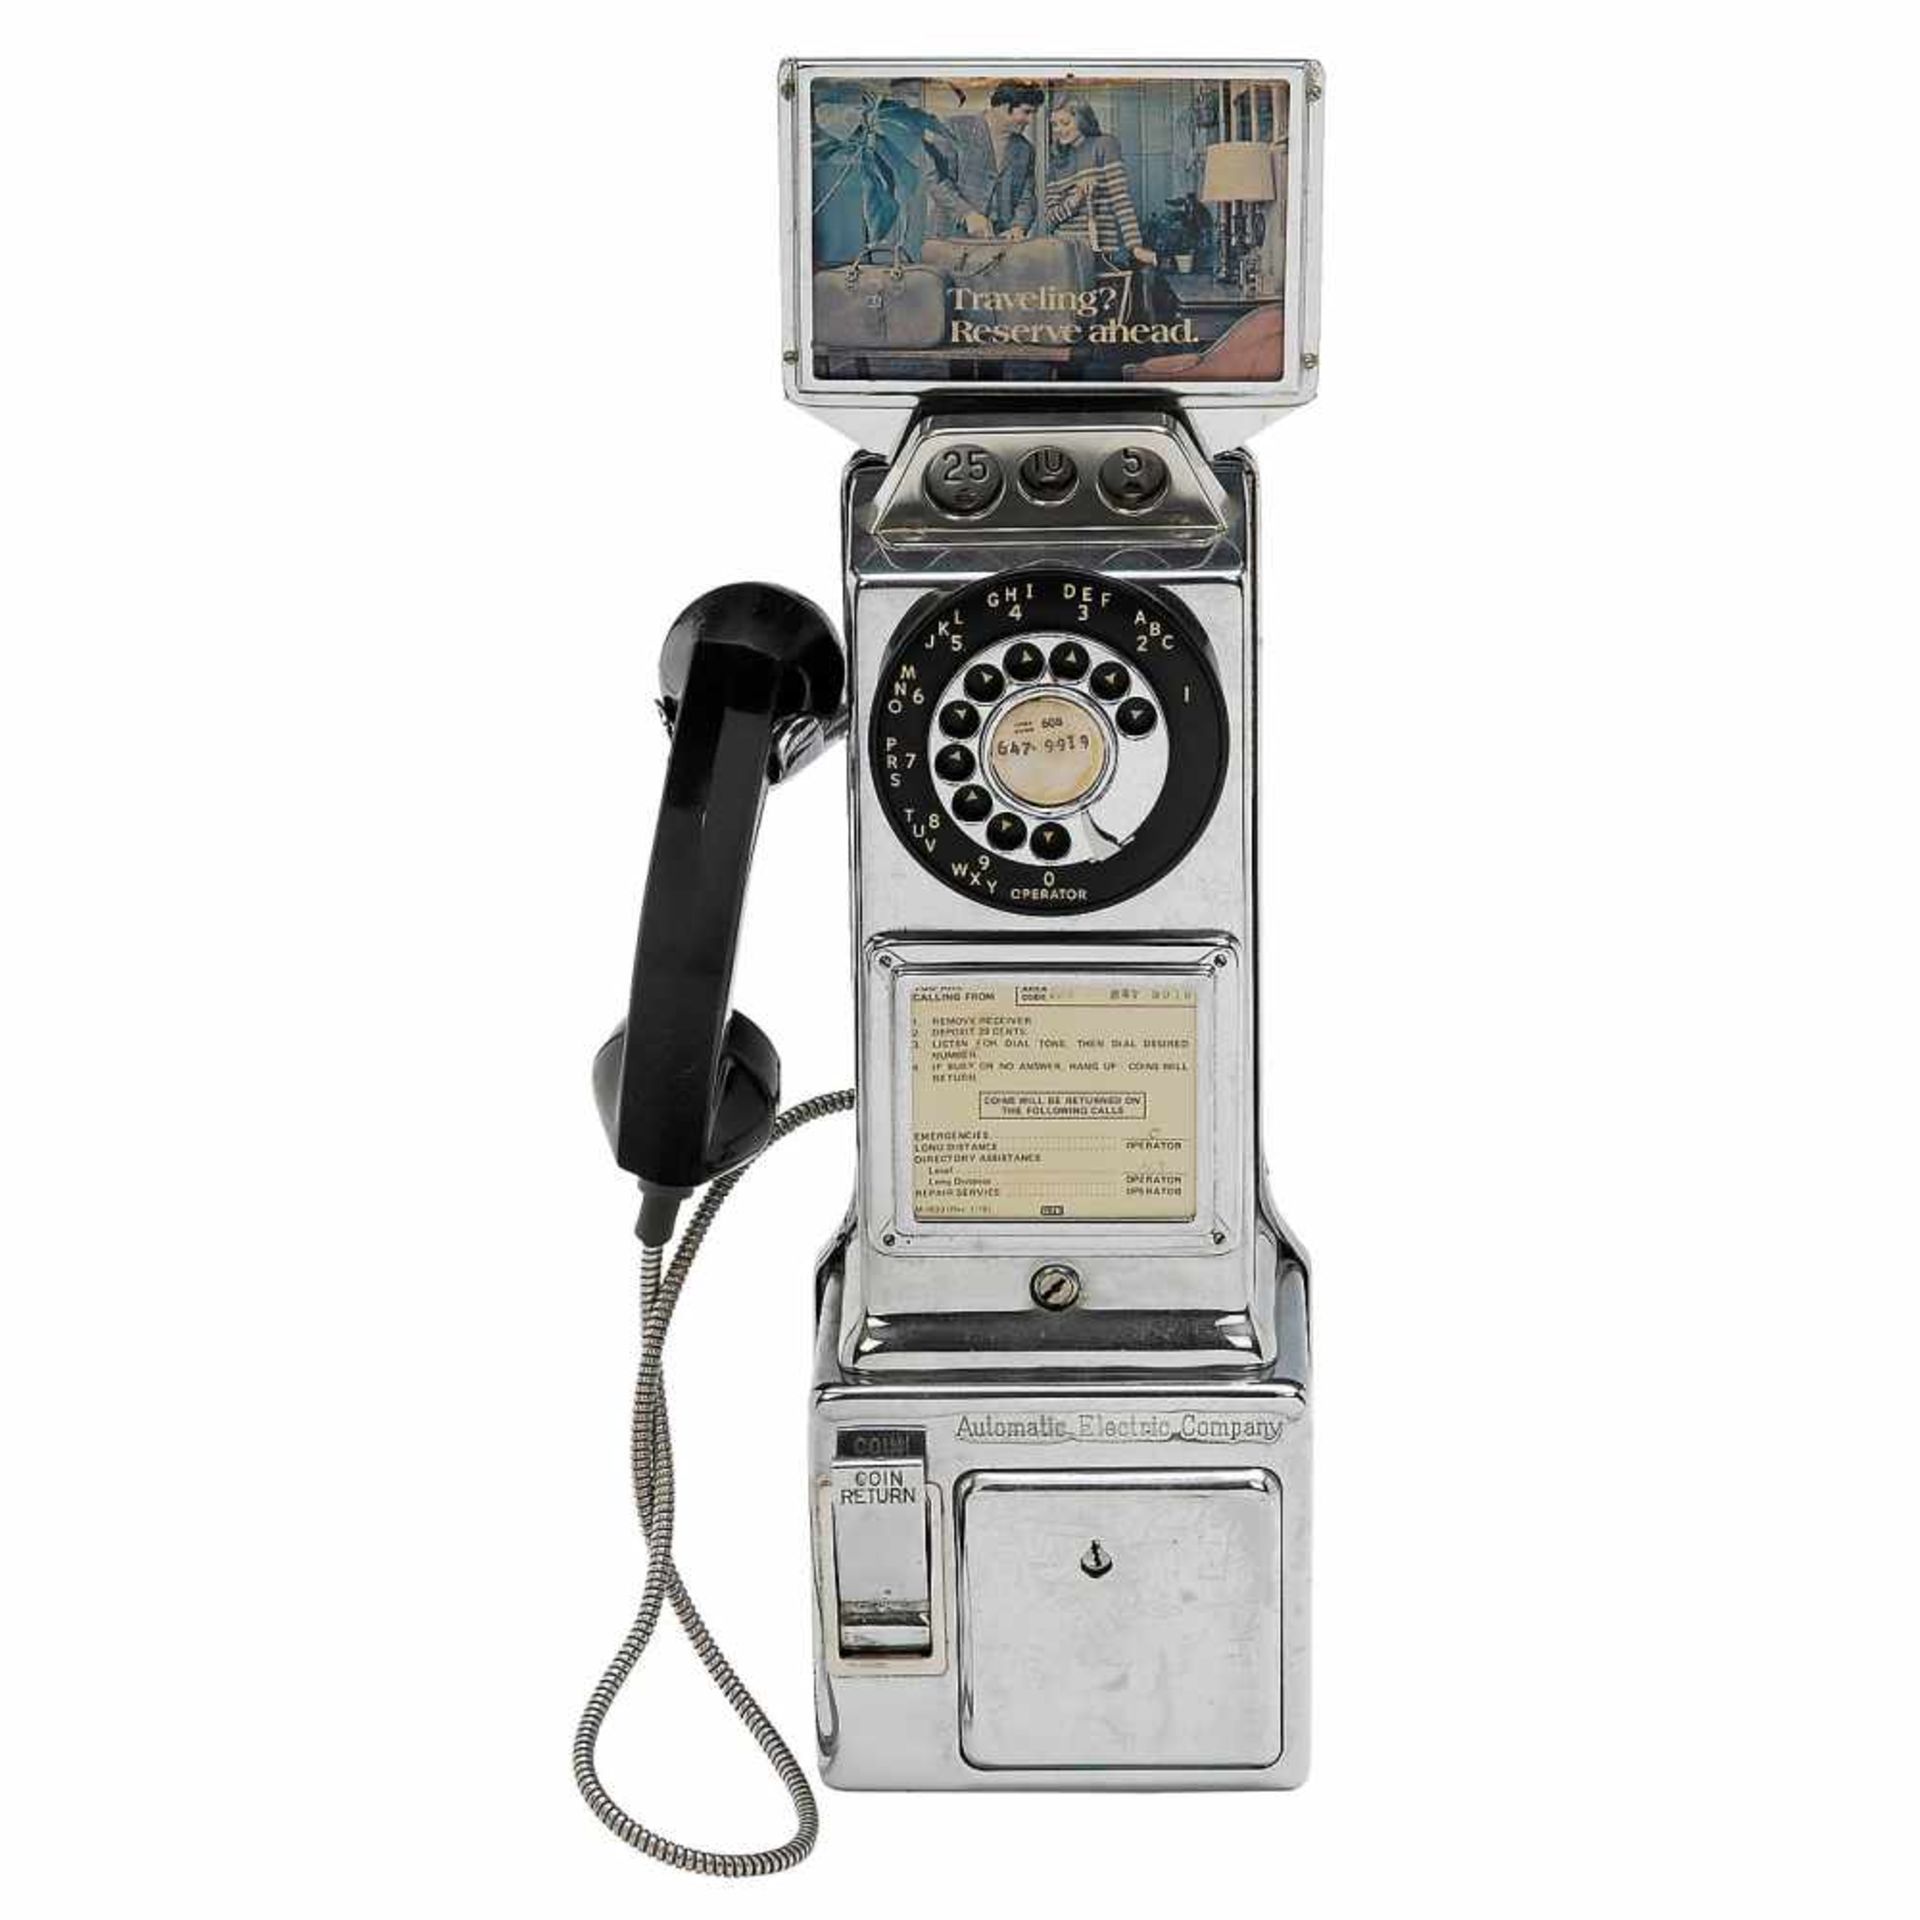 American Pay Phone, c. 1950Automatic Electric Company, Chicago. Chrome-plated, bakelite earphone,